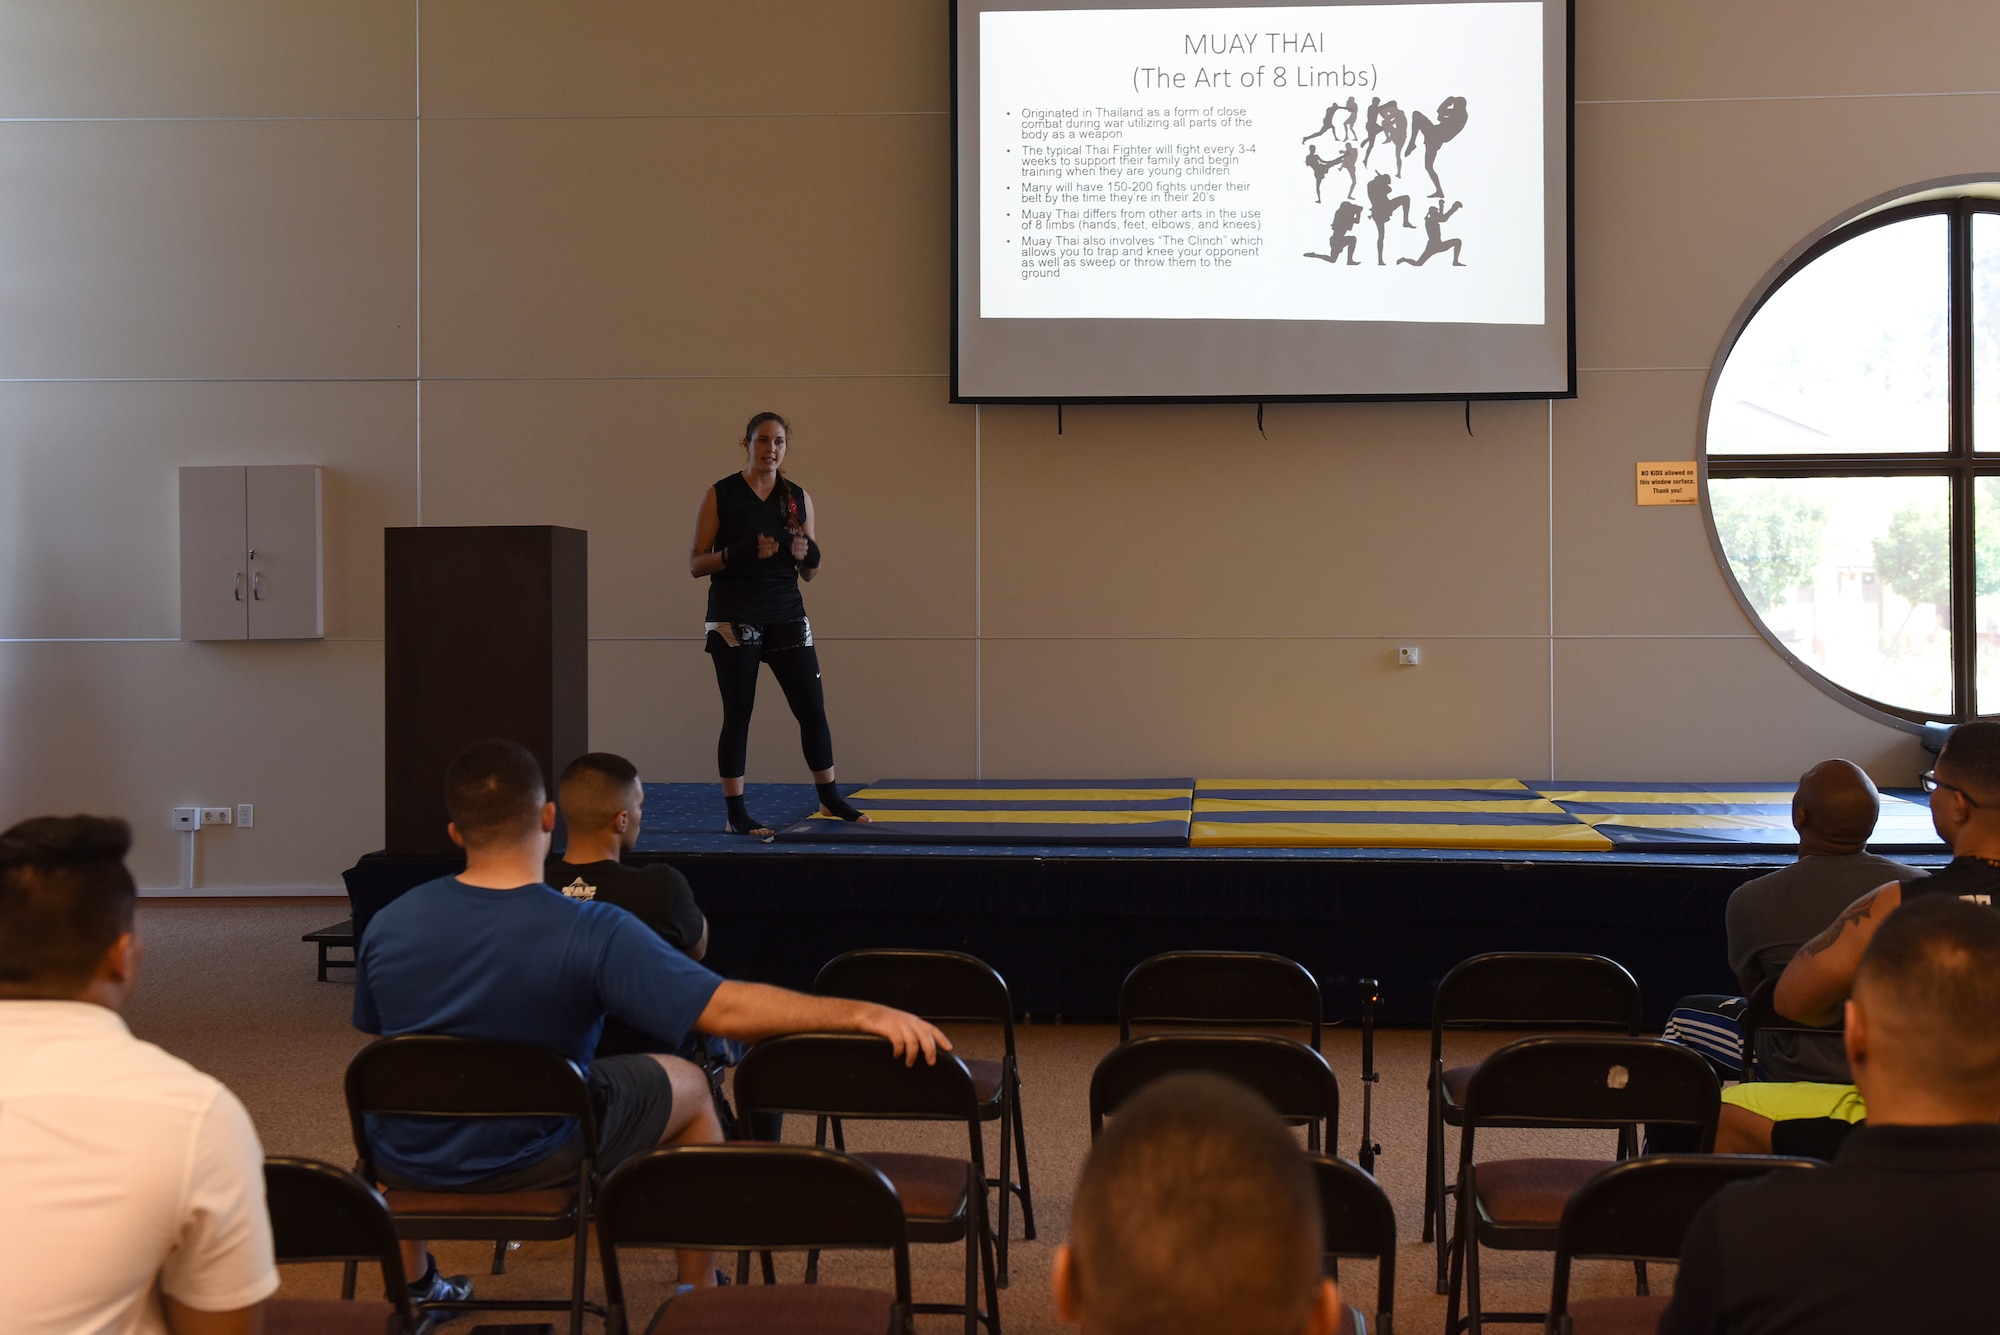 U.S. Air Force Staff Sgt. Iiae Hess, 39th Operations Support Squadron air traffic controller, speaks to attendees about Muay Thai during a mixed martial arts workshop at Incirlik Air Base, Turkey, June 9, 2018.